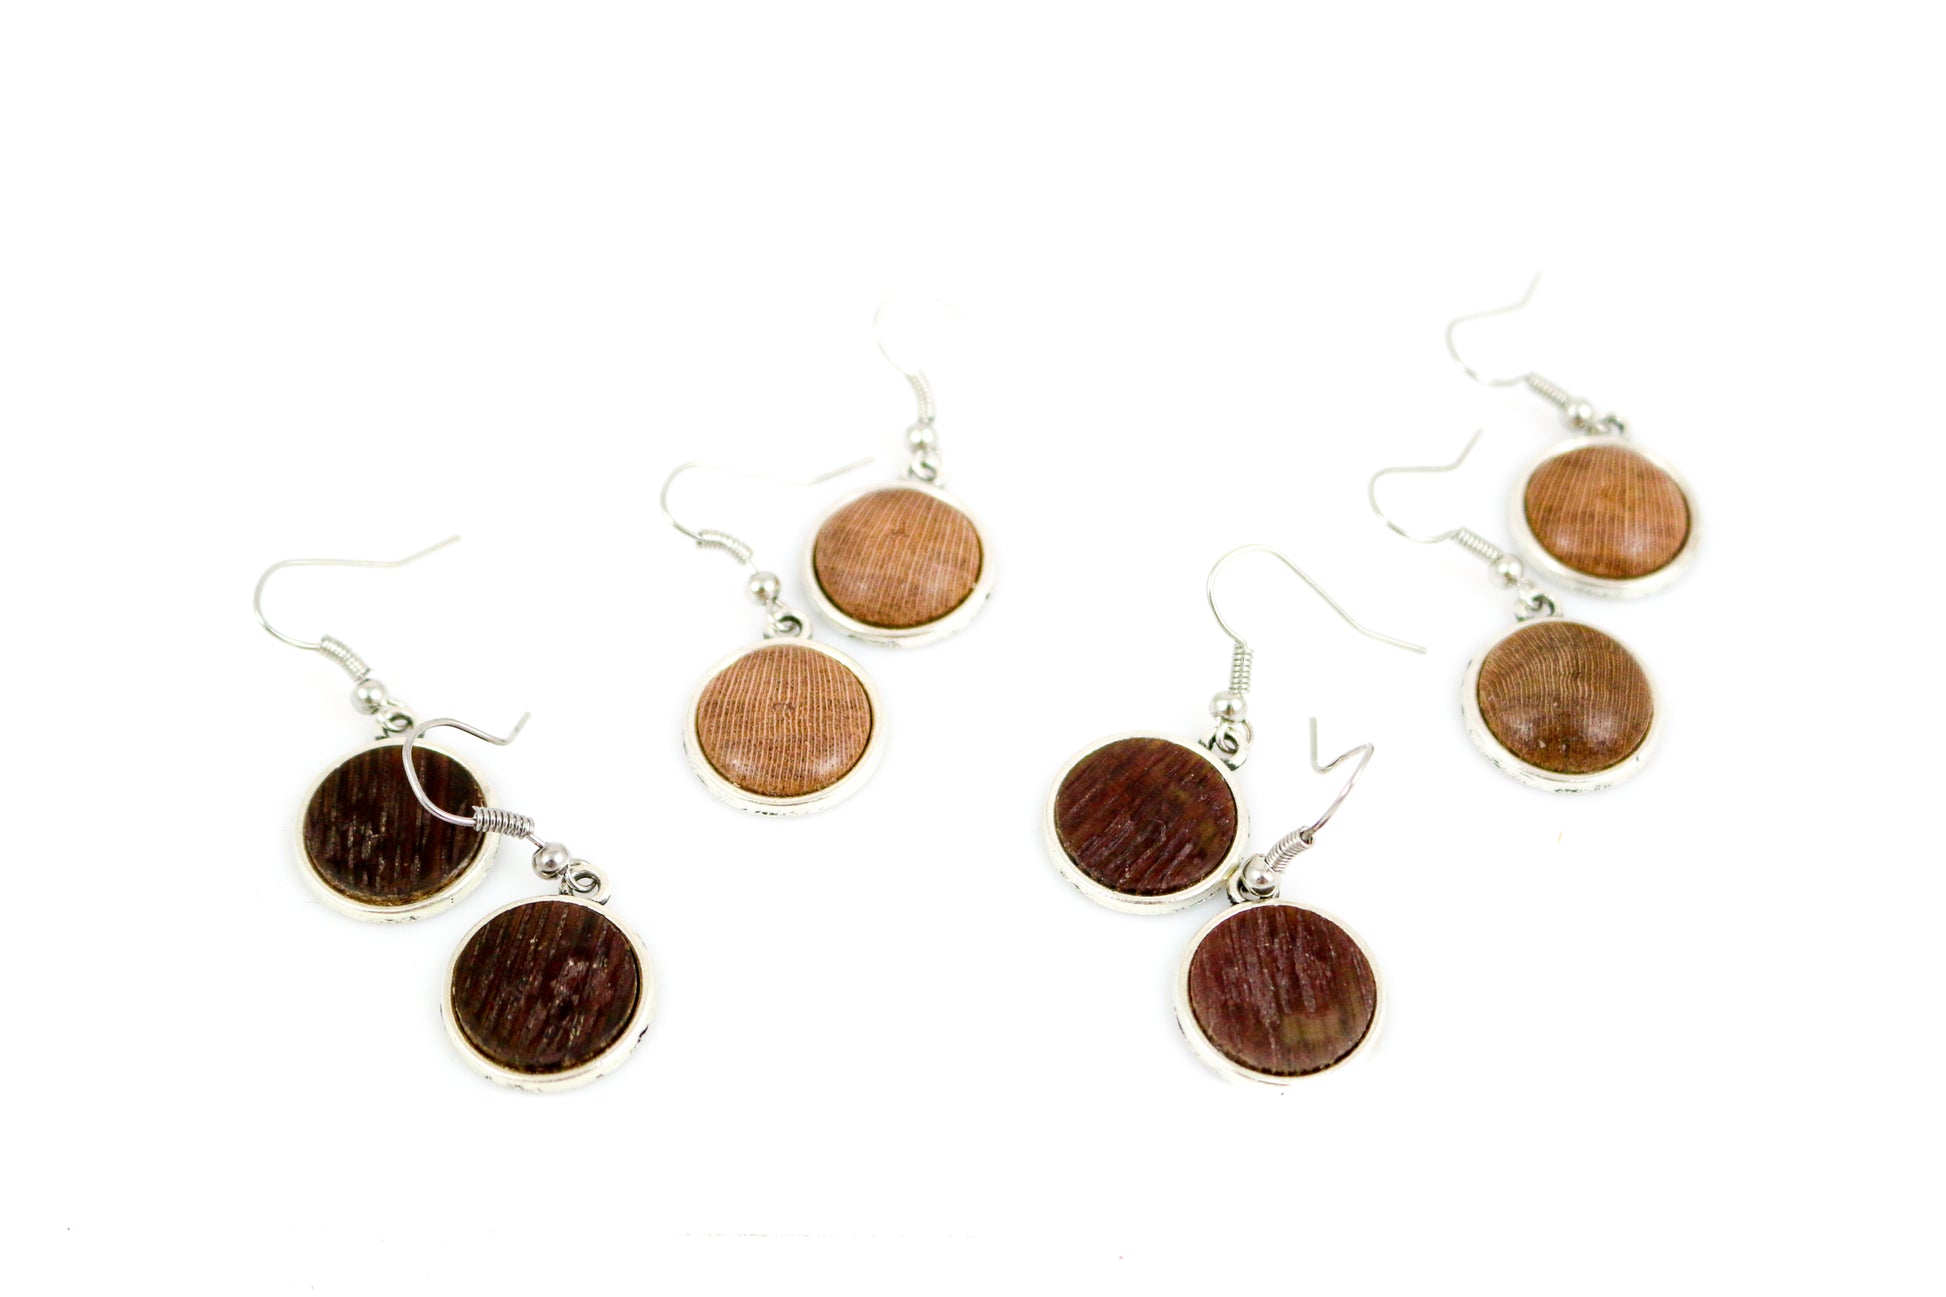 These beautiful silver plated earrings are crafted from retired grapevines. Years of producing wine and now reclaimed into these amazing pieces of jewelry. Each piece is hand cut and assembled into fabulous art. Modern and chic yet wonderfully rustic. Stylishly sexy, and completely made from recycled barrels. This is functional art at its best and a delight to have.